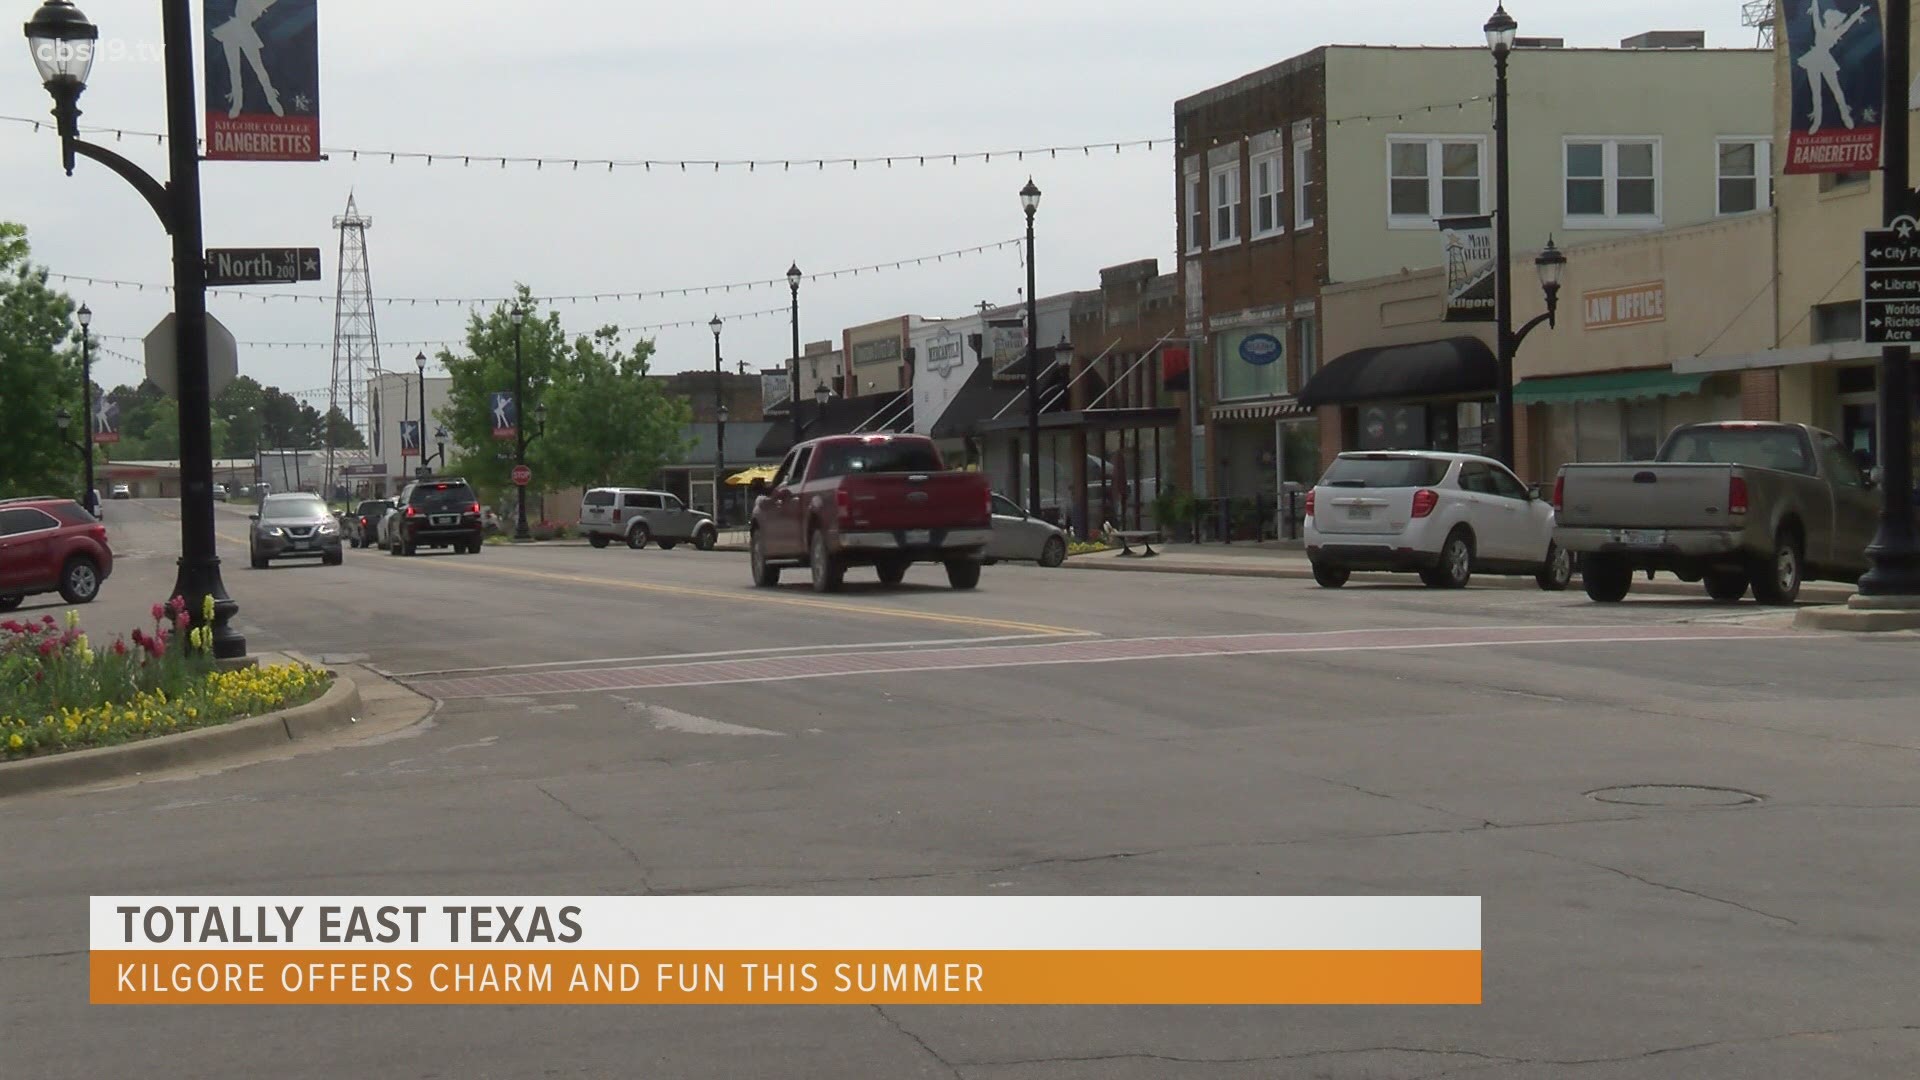 After little travel and tourism amid the pandemic, Travel Texas says the industry is recovering. New events are planned to get visitors back in downtown Kilgore.